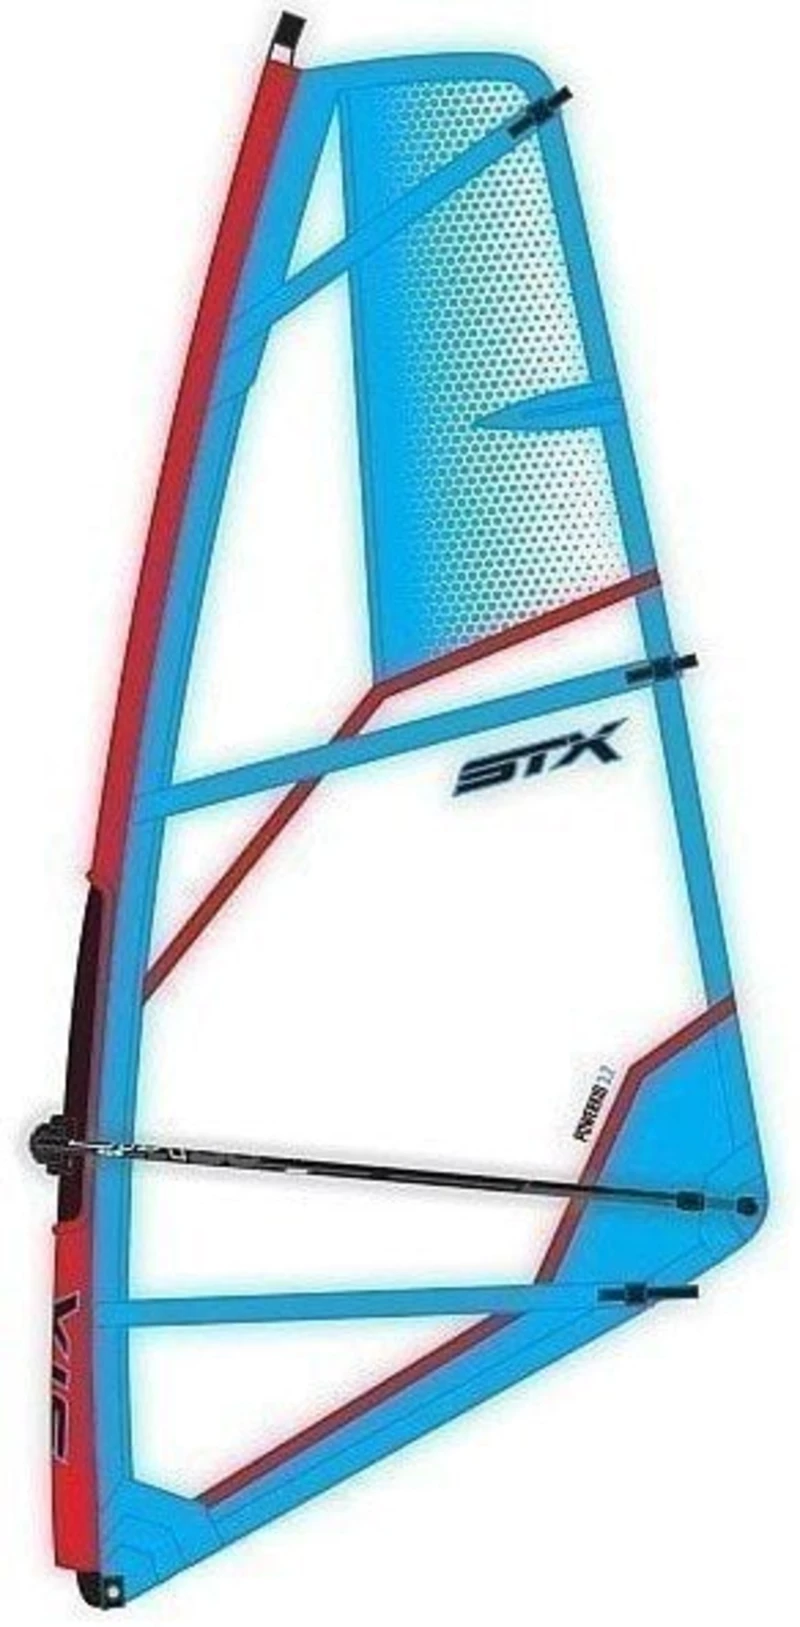 STX Plachta pro paddleboard Powerkid 4,4 m² Blue/Red